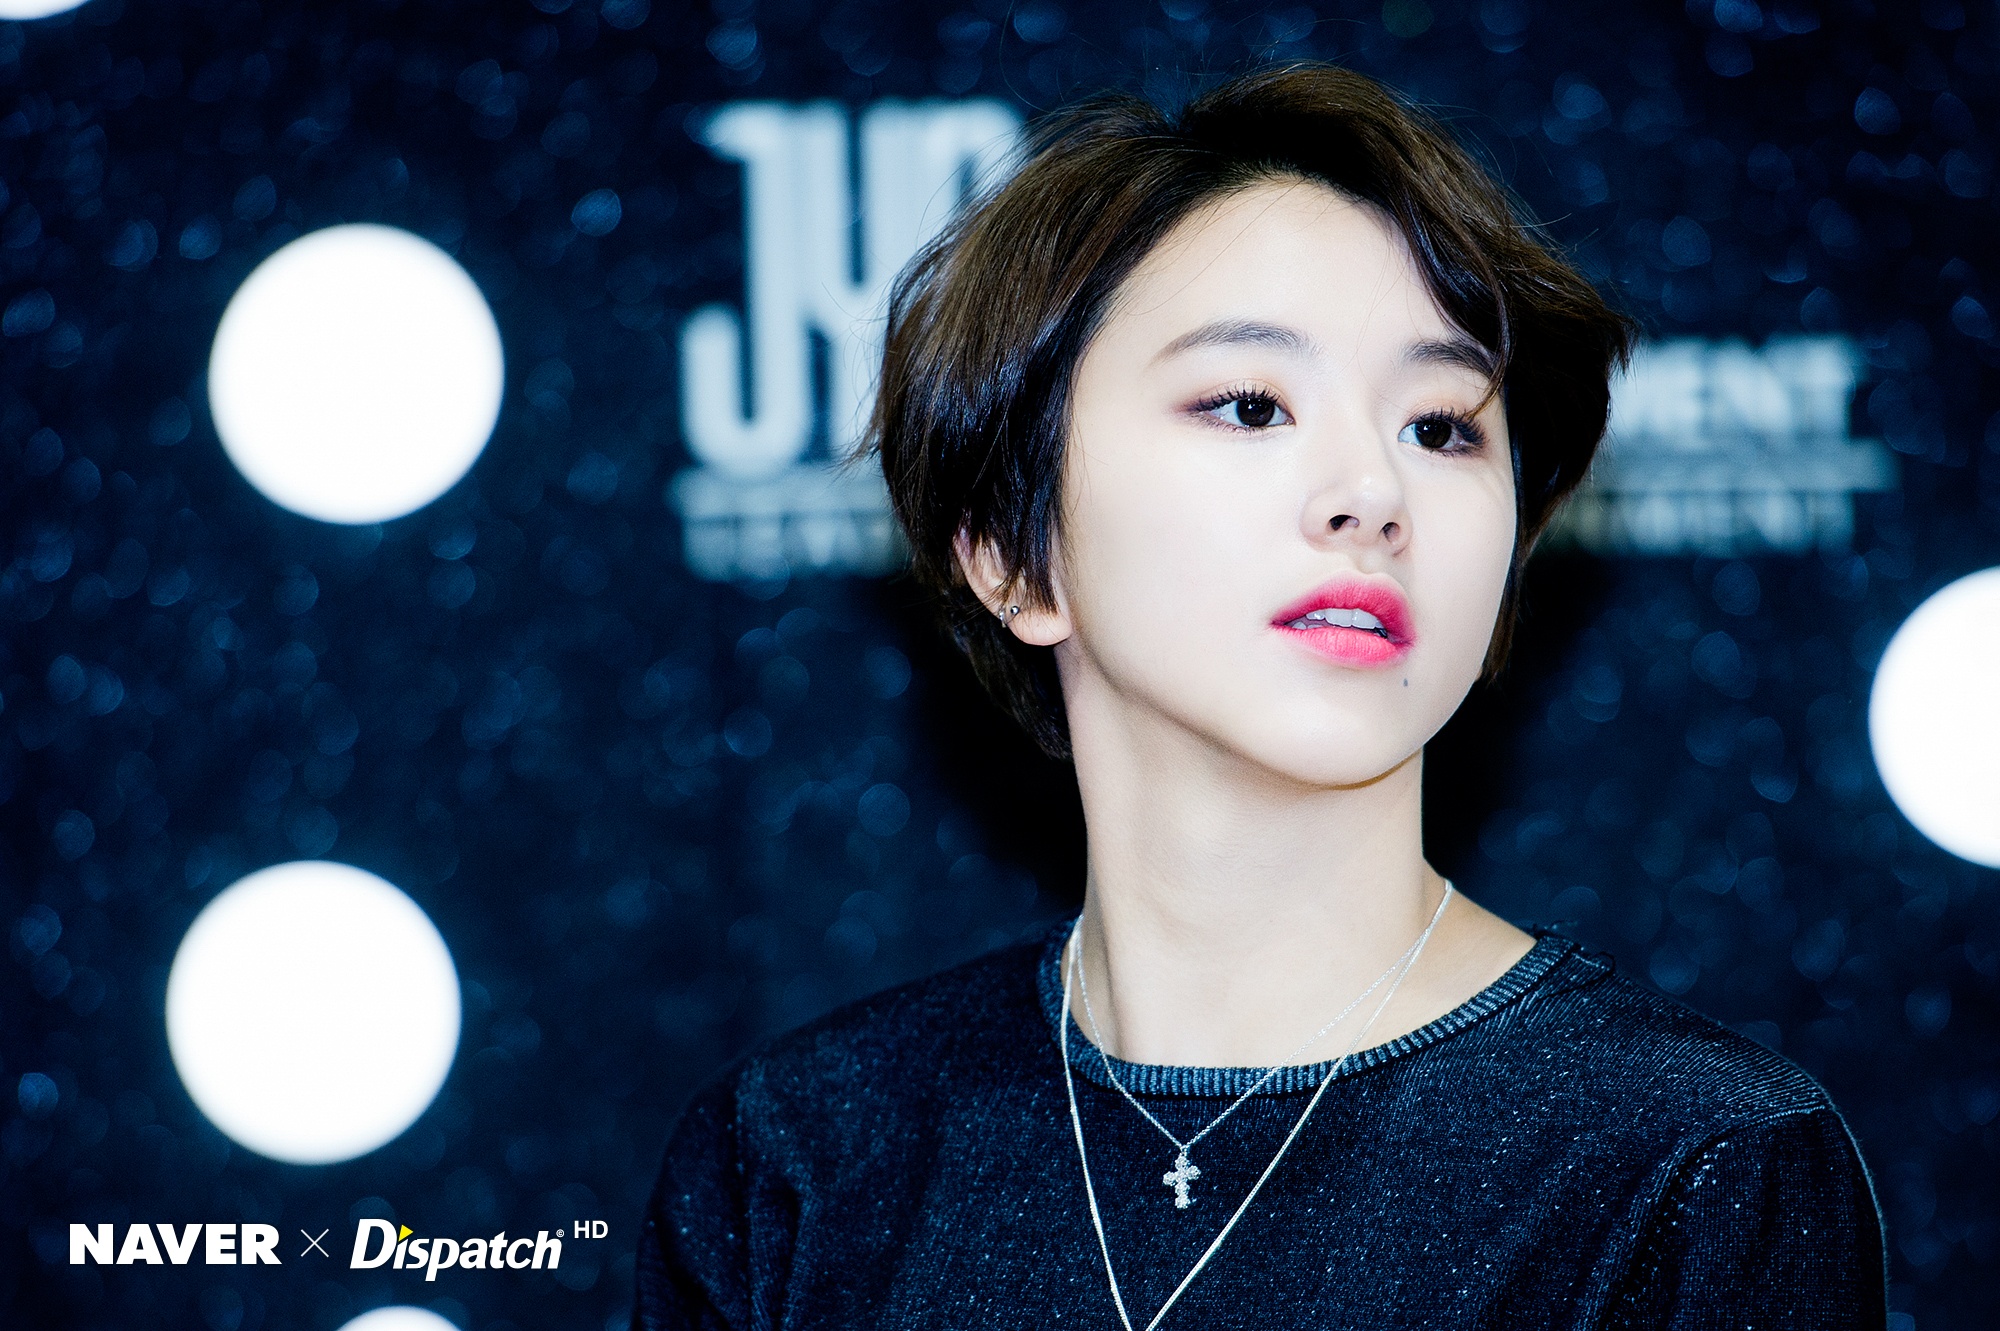 Chaeyoung also has an added level of charisma with a short cut. 